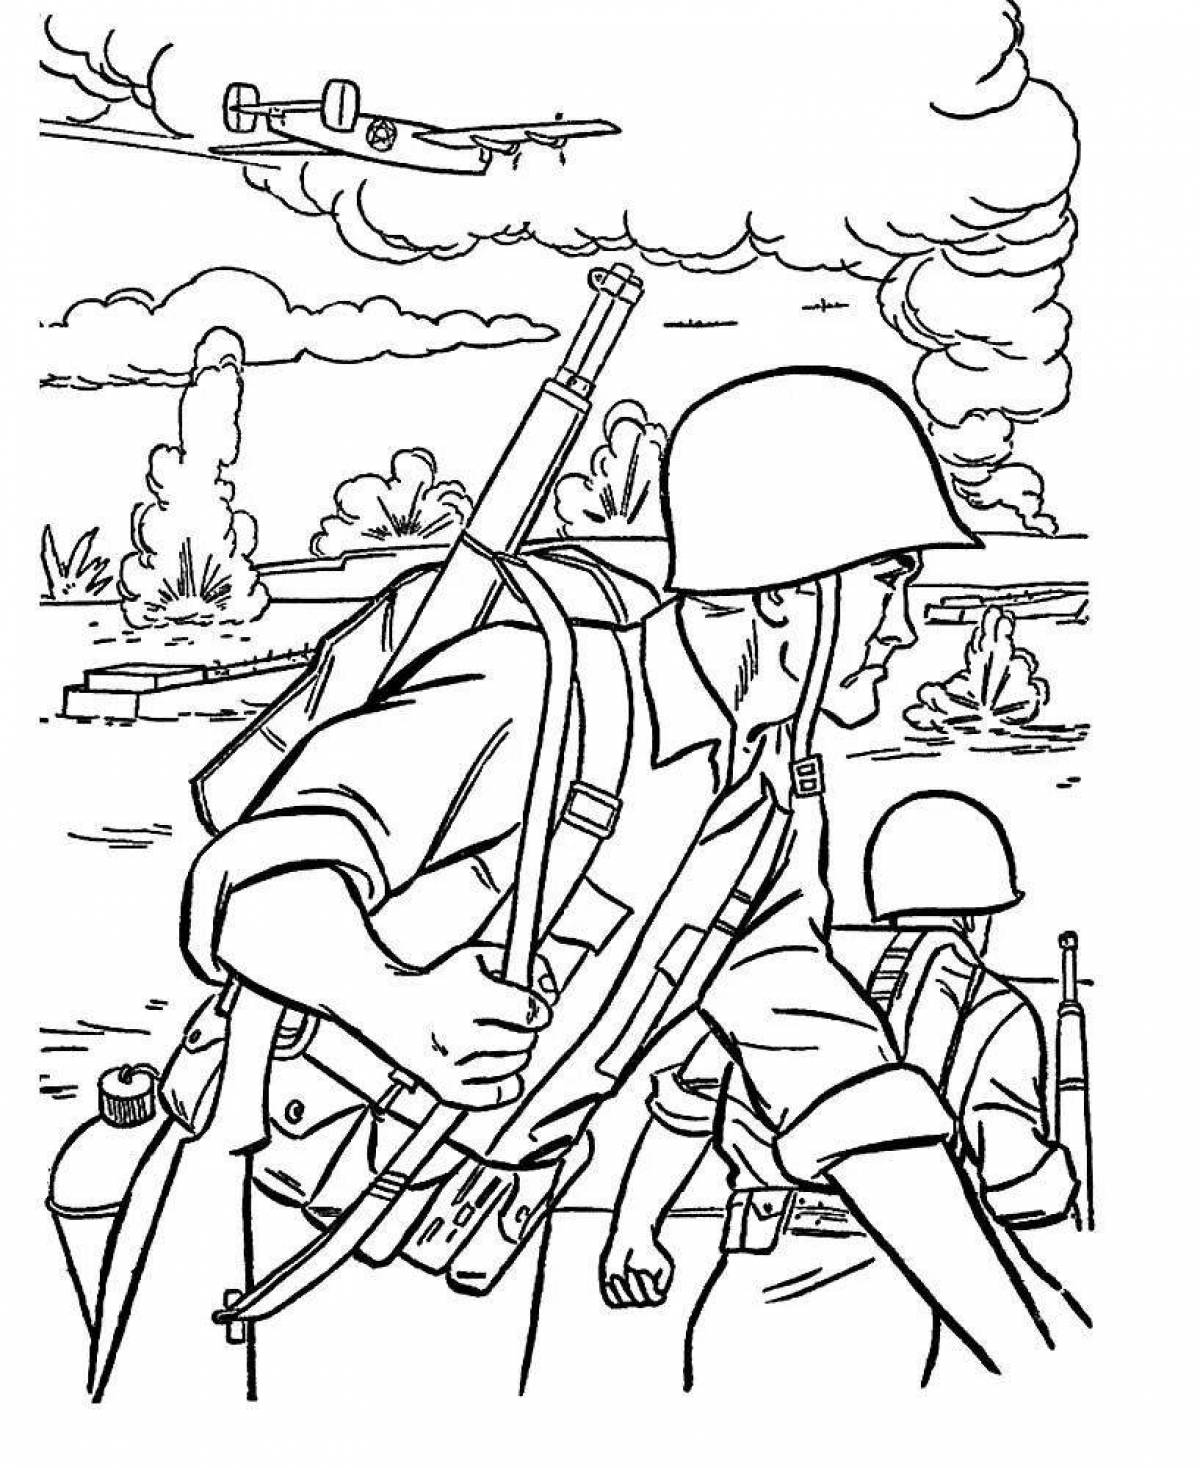 Glorious military soldiers coloring pages for children